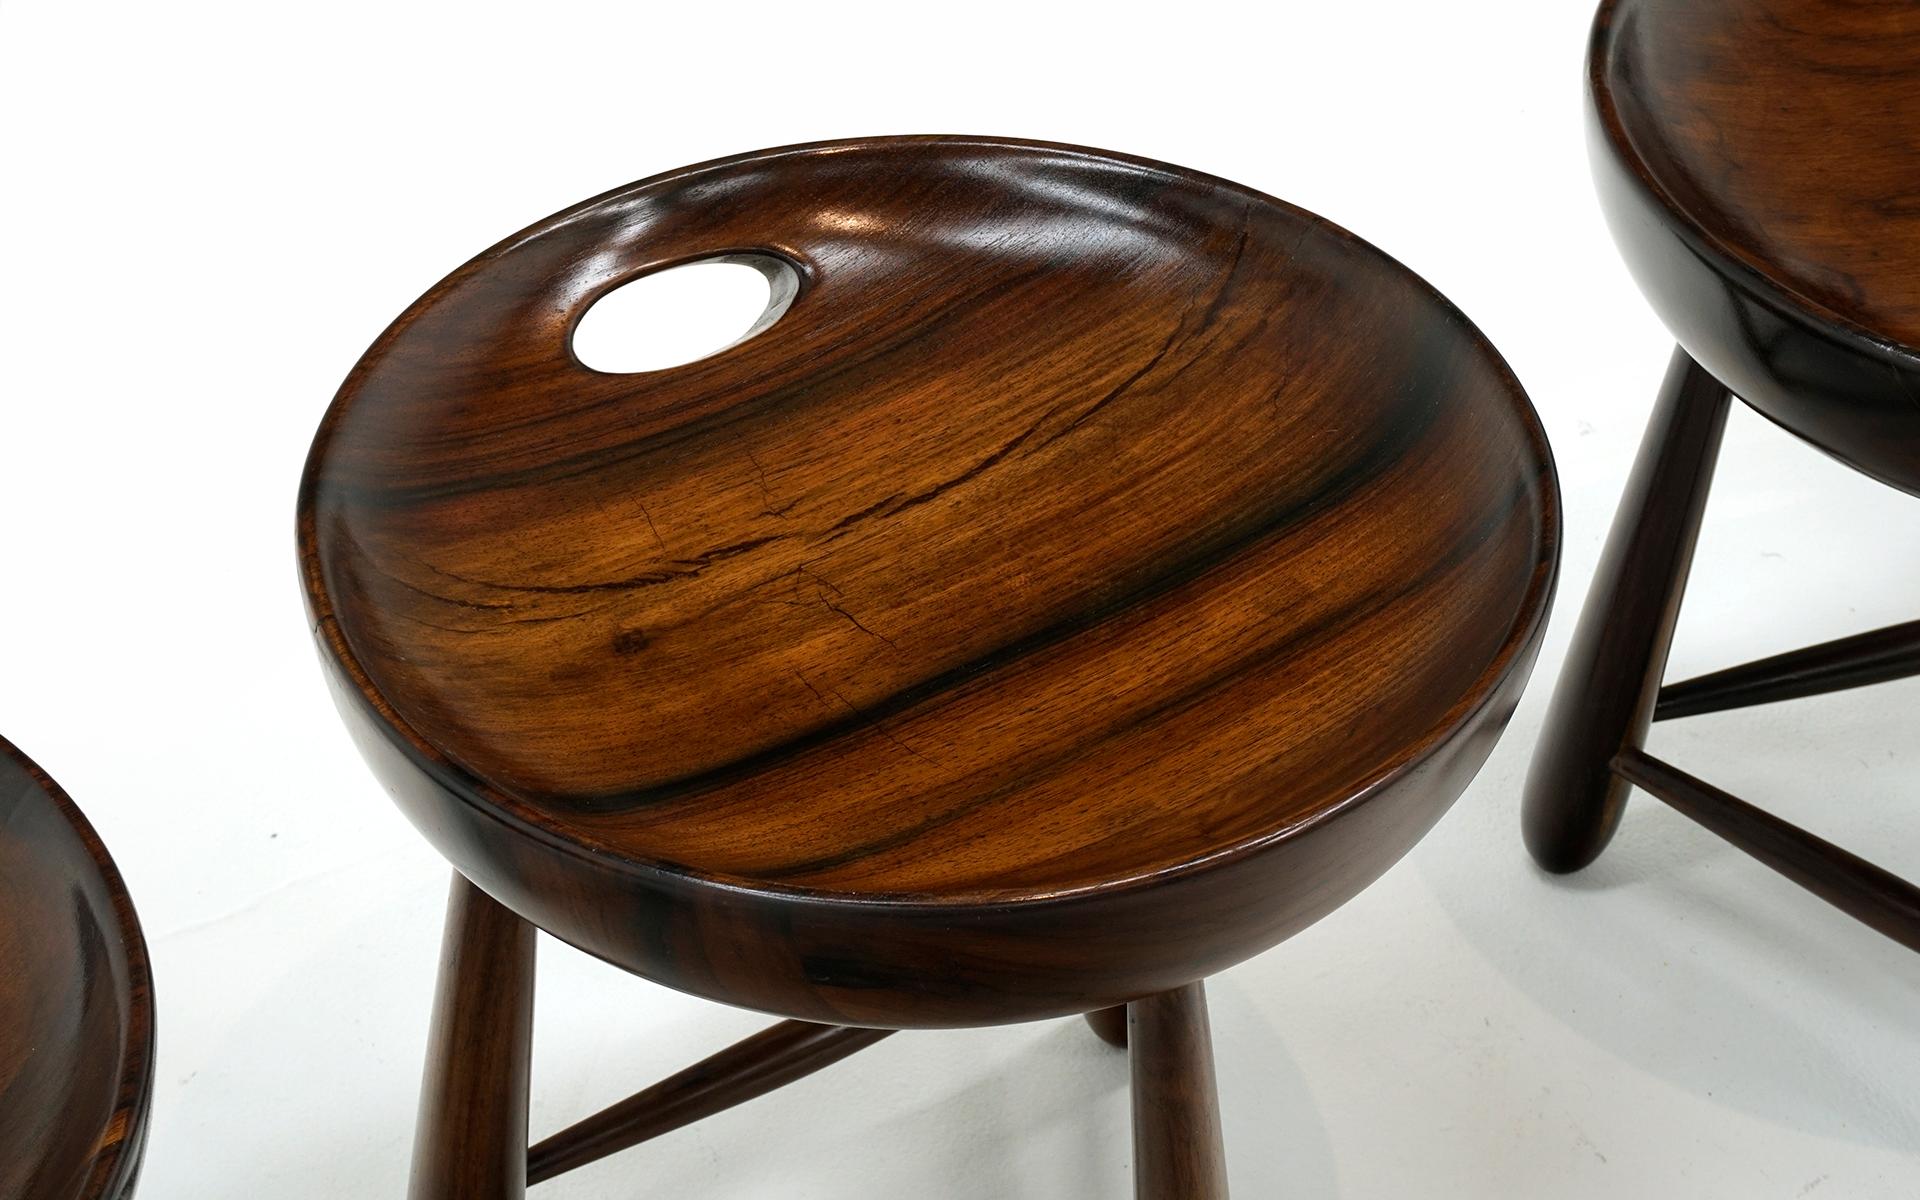 Mid-Century Modern Mocho Stool in Rosewood by  Sergio Rodrigues for Oca, Brazil, 1954. Signed. For Sale